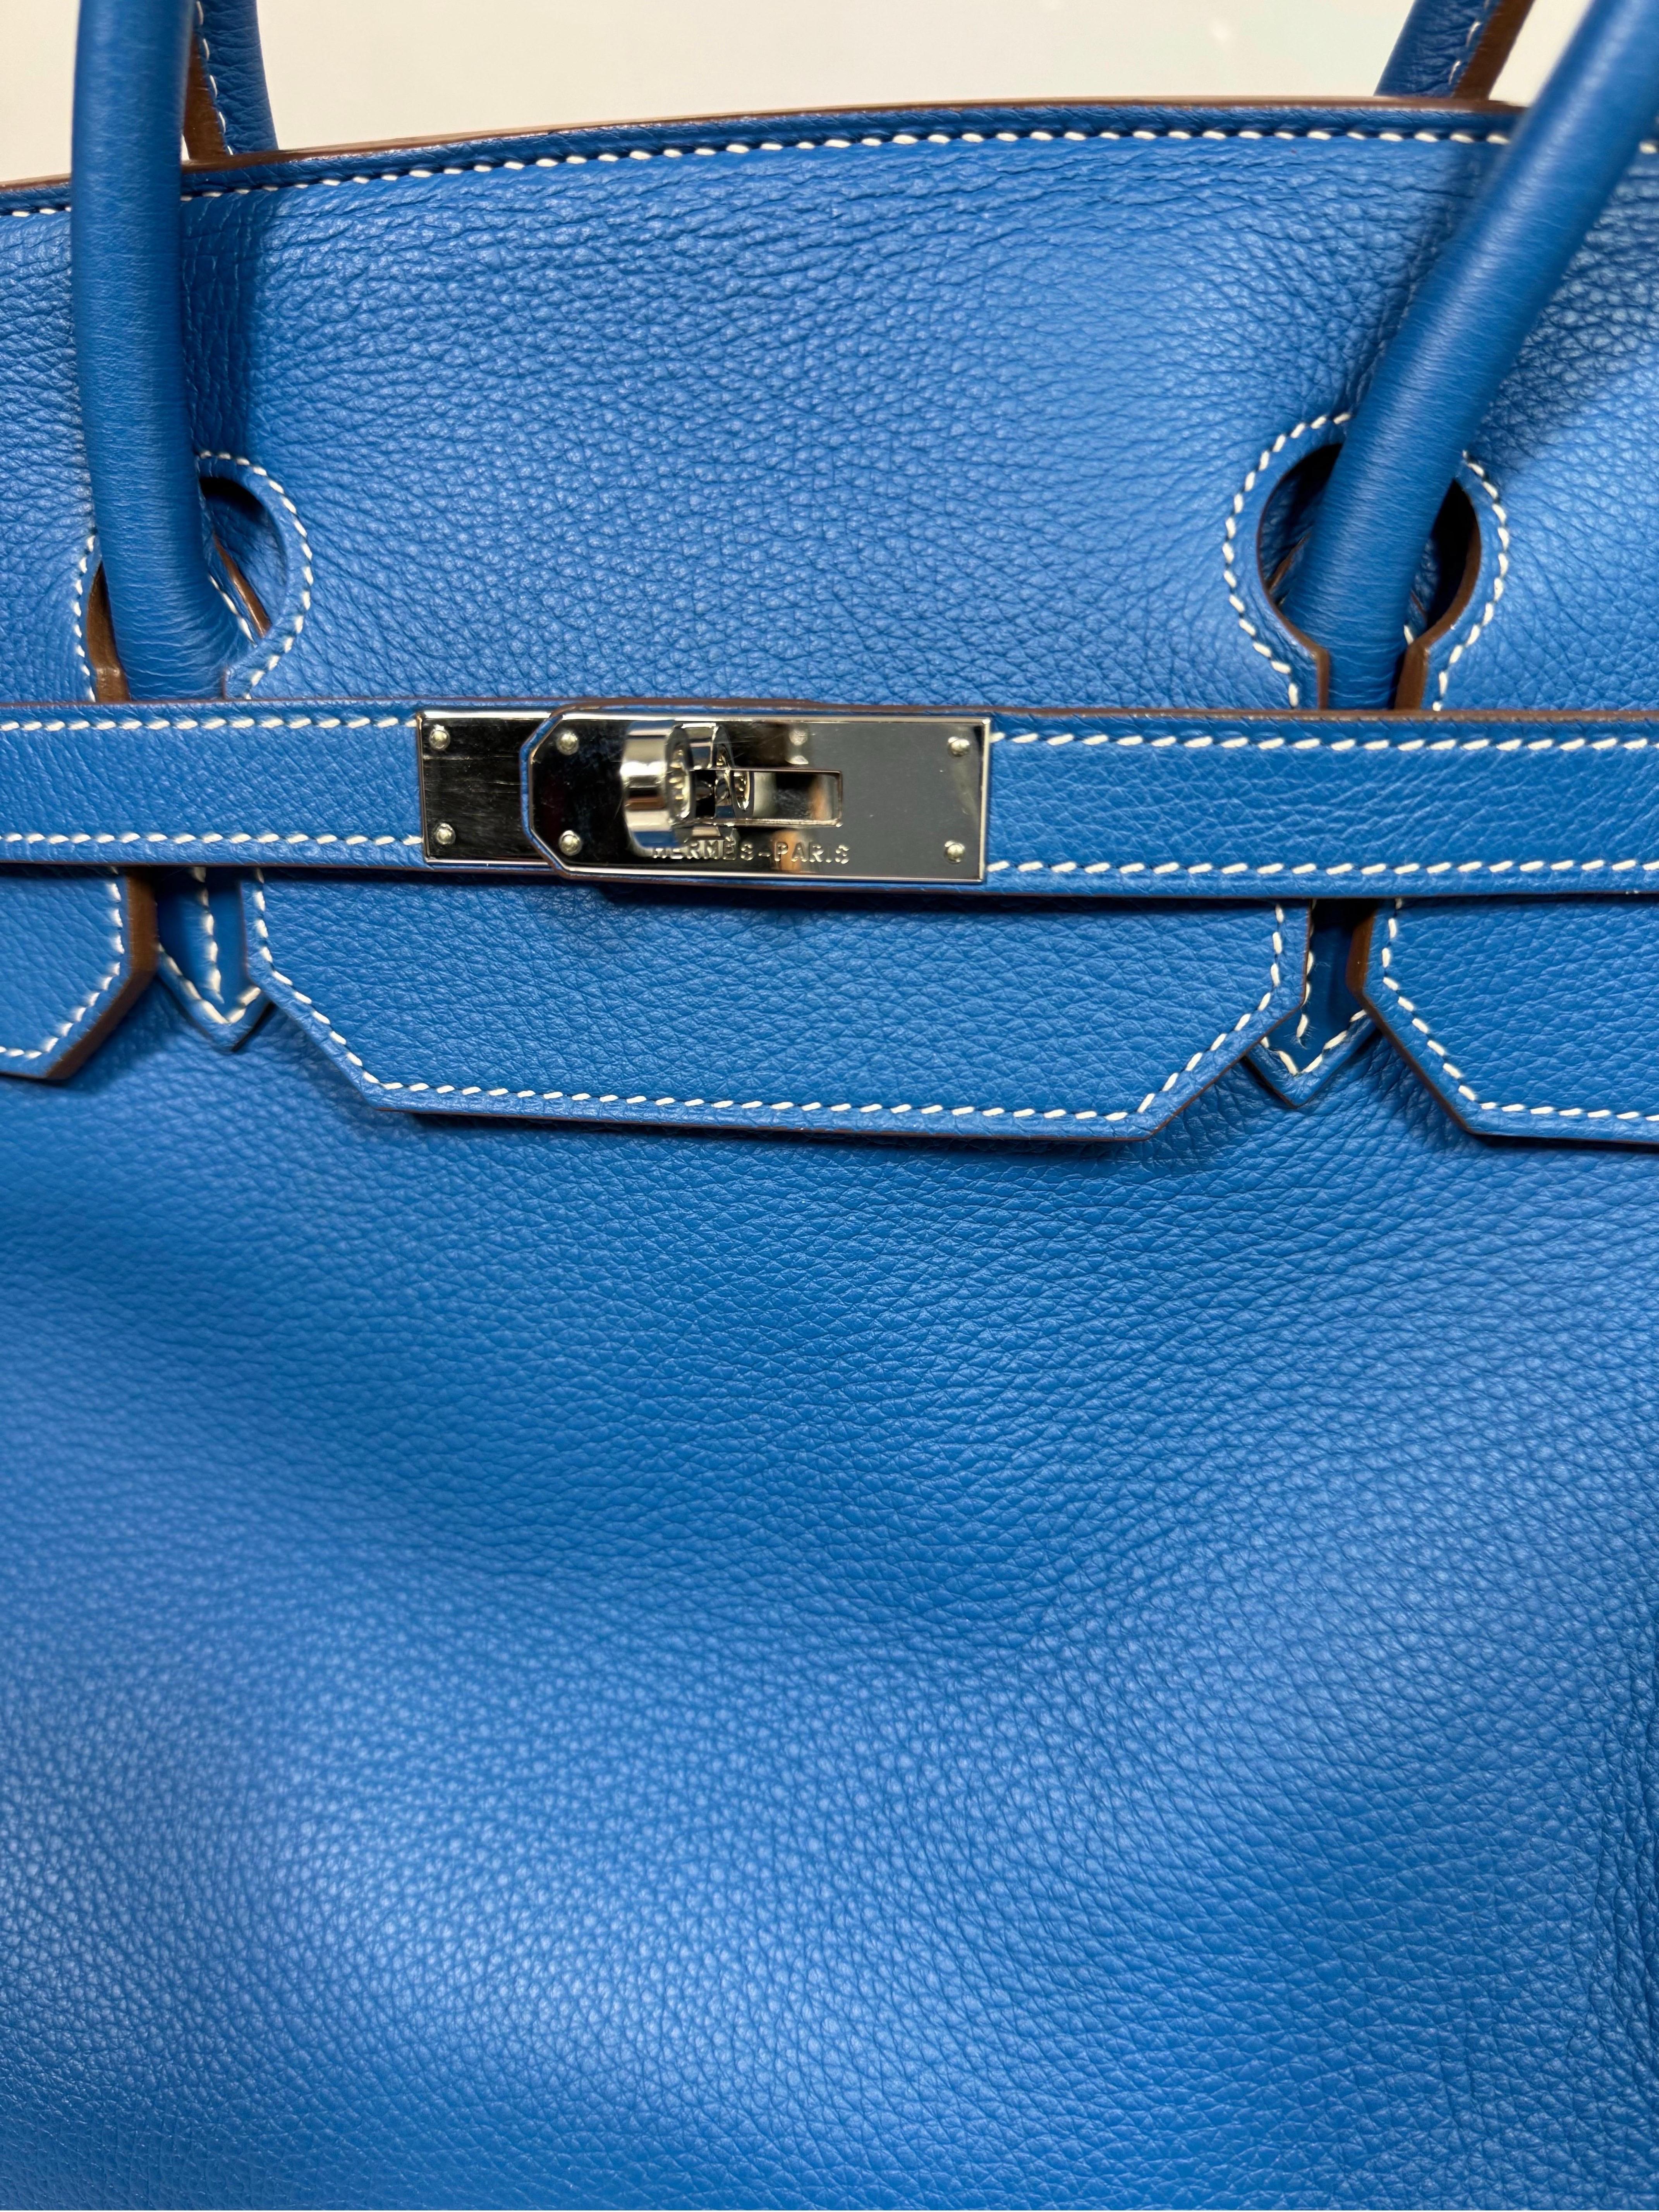 Hermes 40cm  Mykonos Blue and White Clemence Limited edition Birkin-SHW -2011 For Sale 2